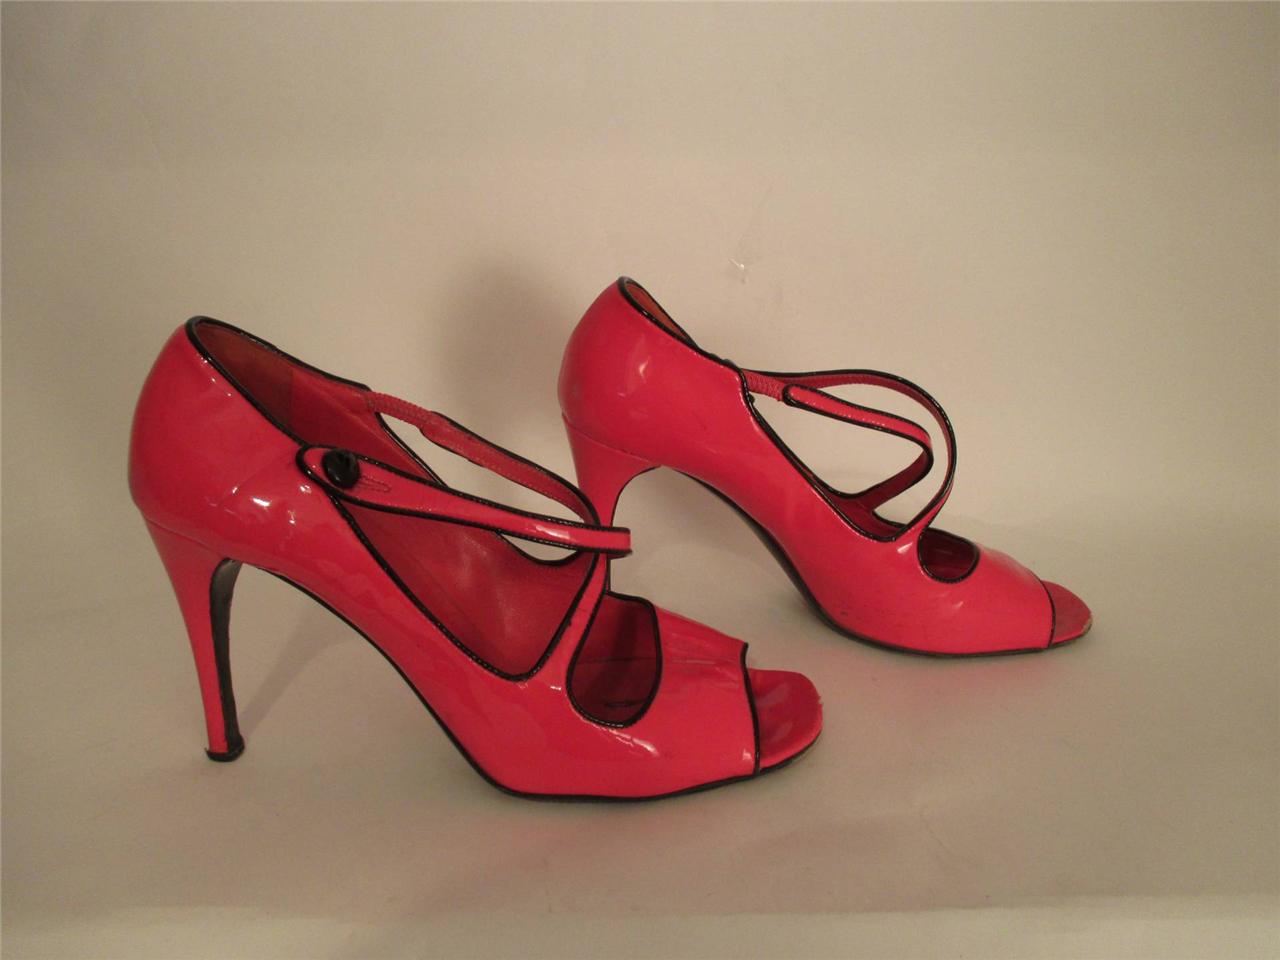 Prada Bright Pink Patent Leather Open Toe Mary Janes - SZ 37.5